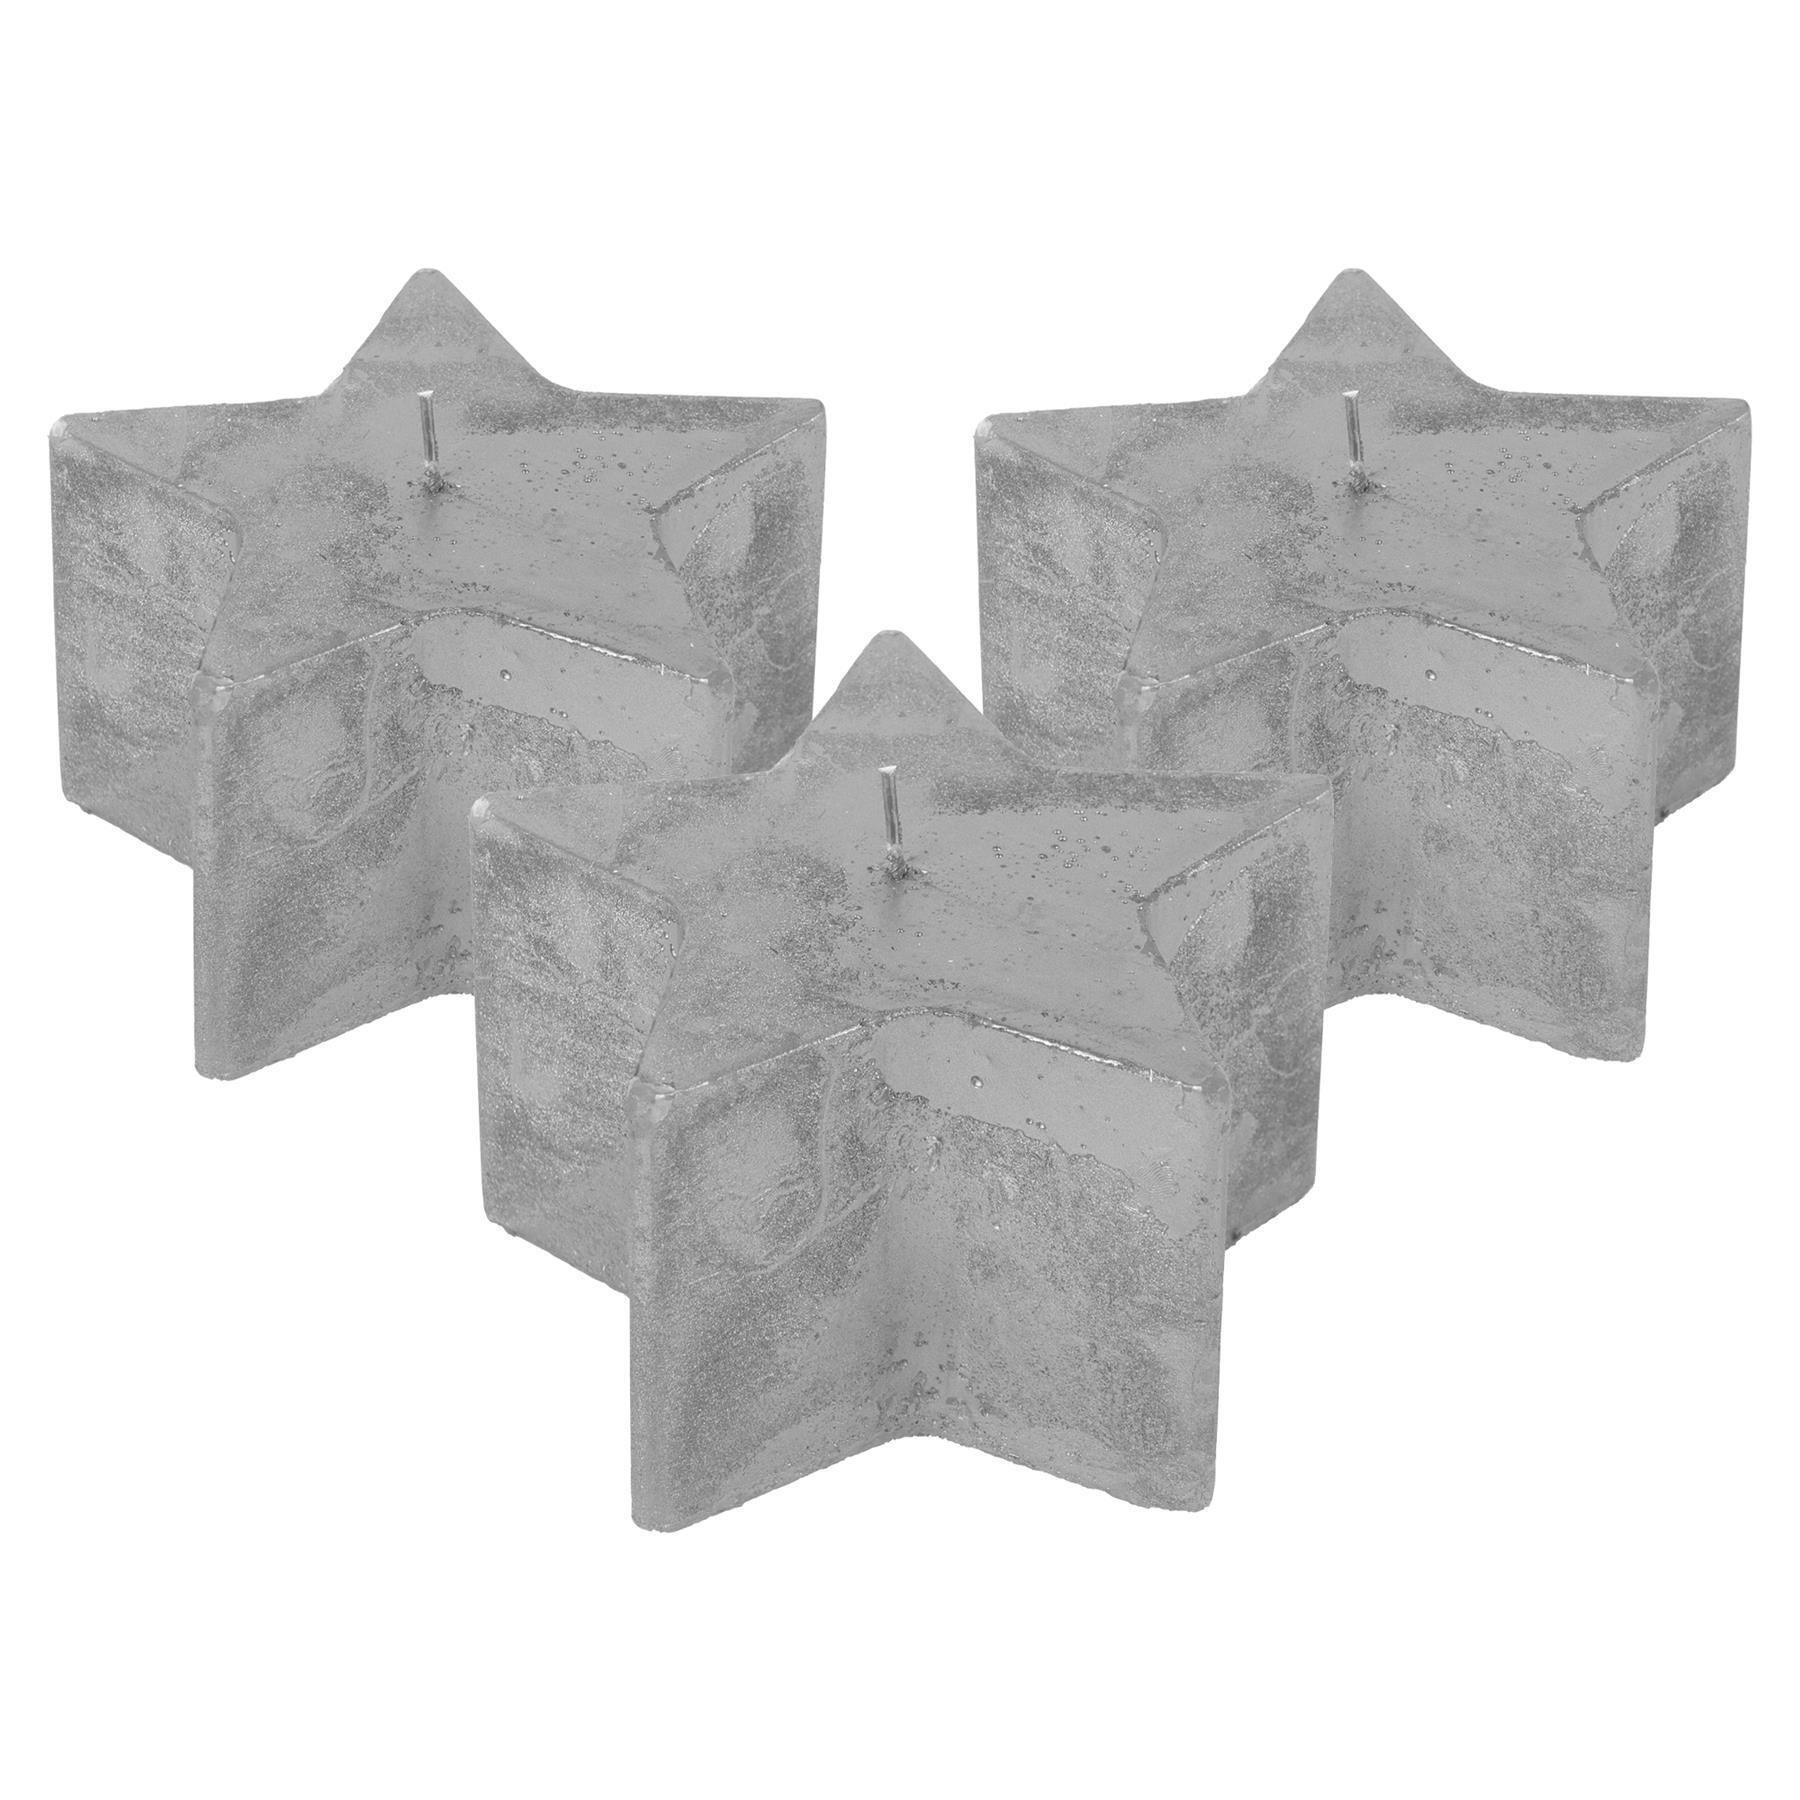 Metallic Star Candle 75 Hours Pack of 3 - image 1